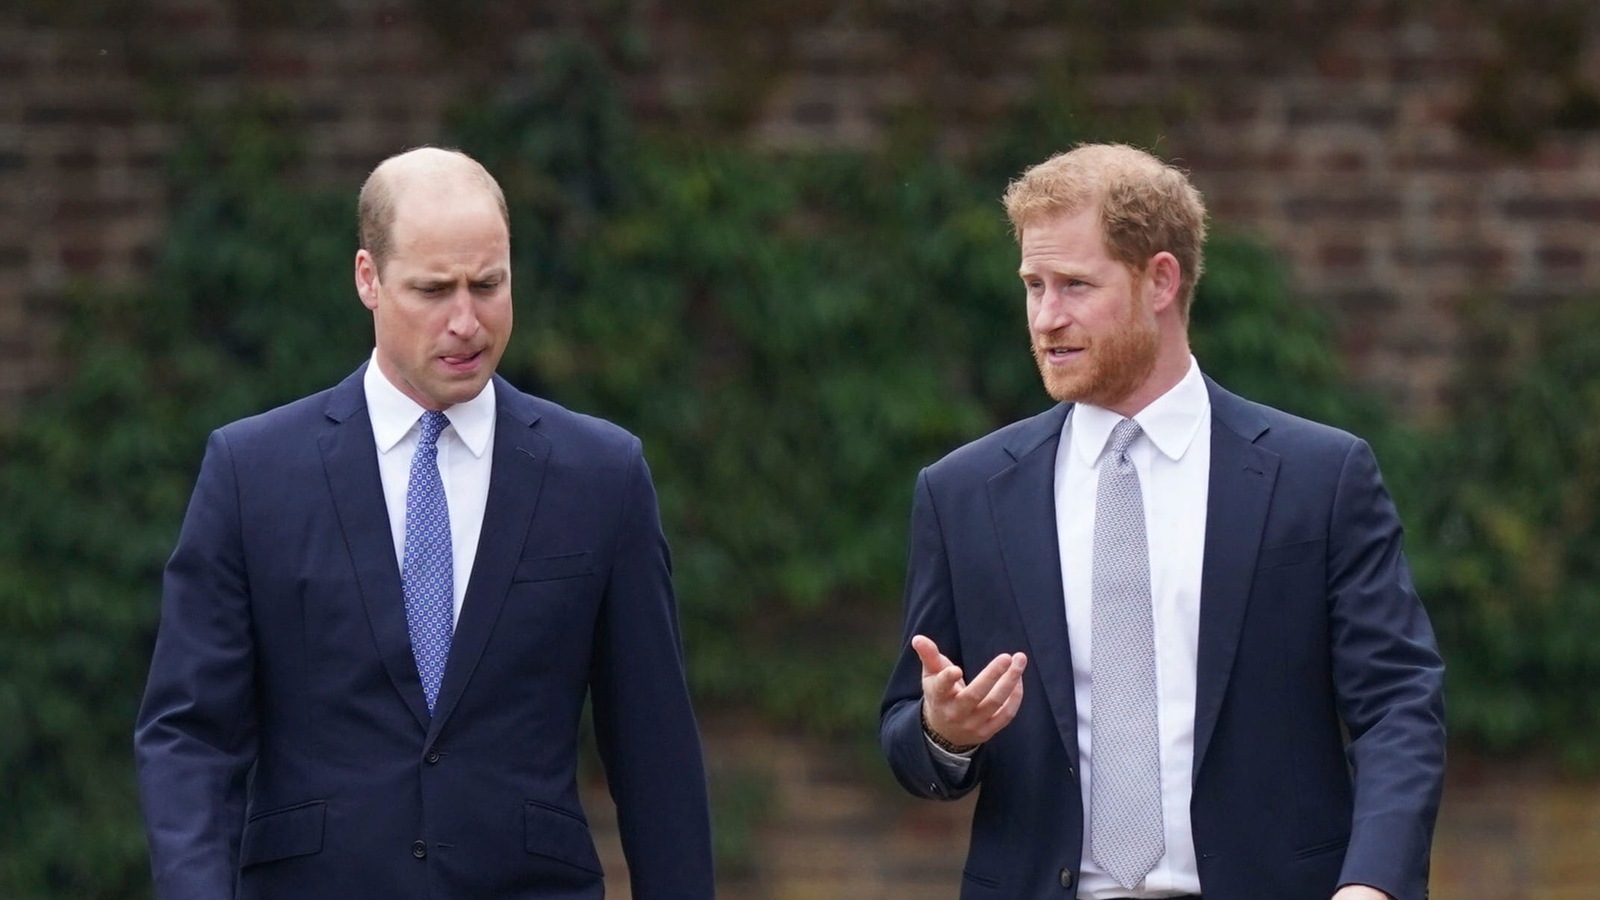 Prince William thinks Harry is a ‘lost cause’: Royal expert on brothers' feud